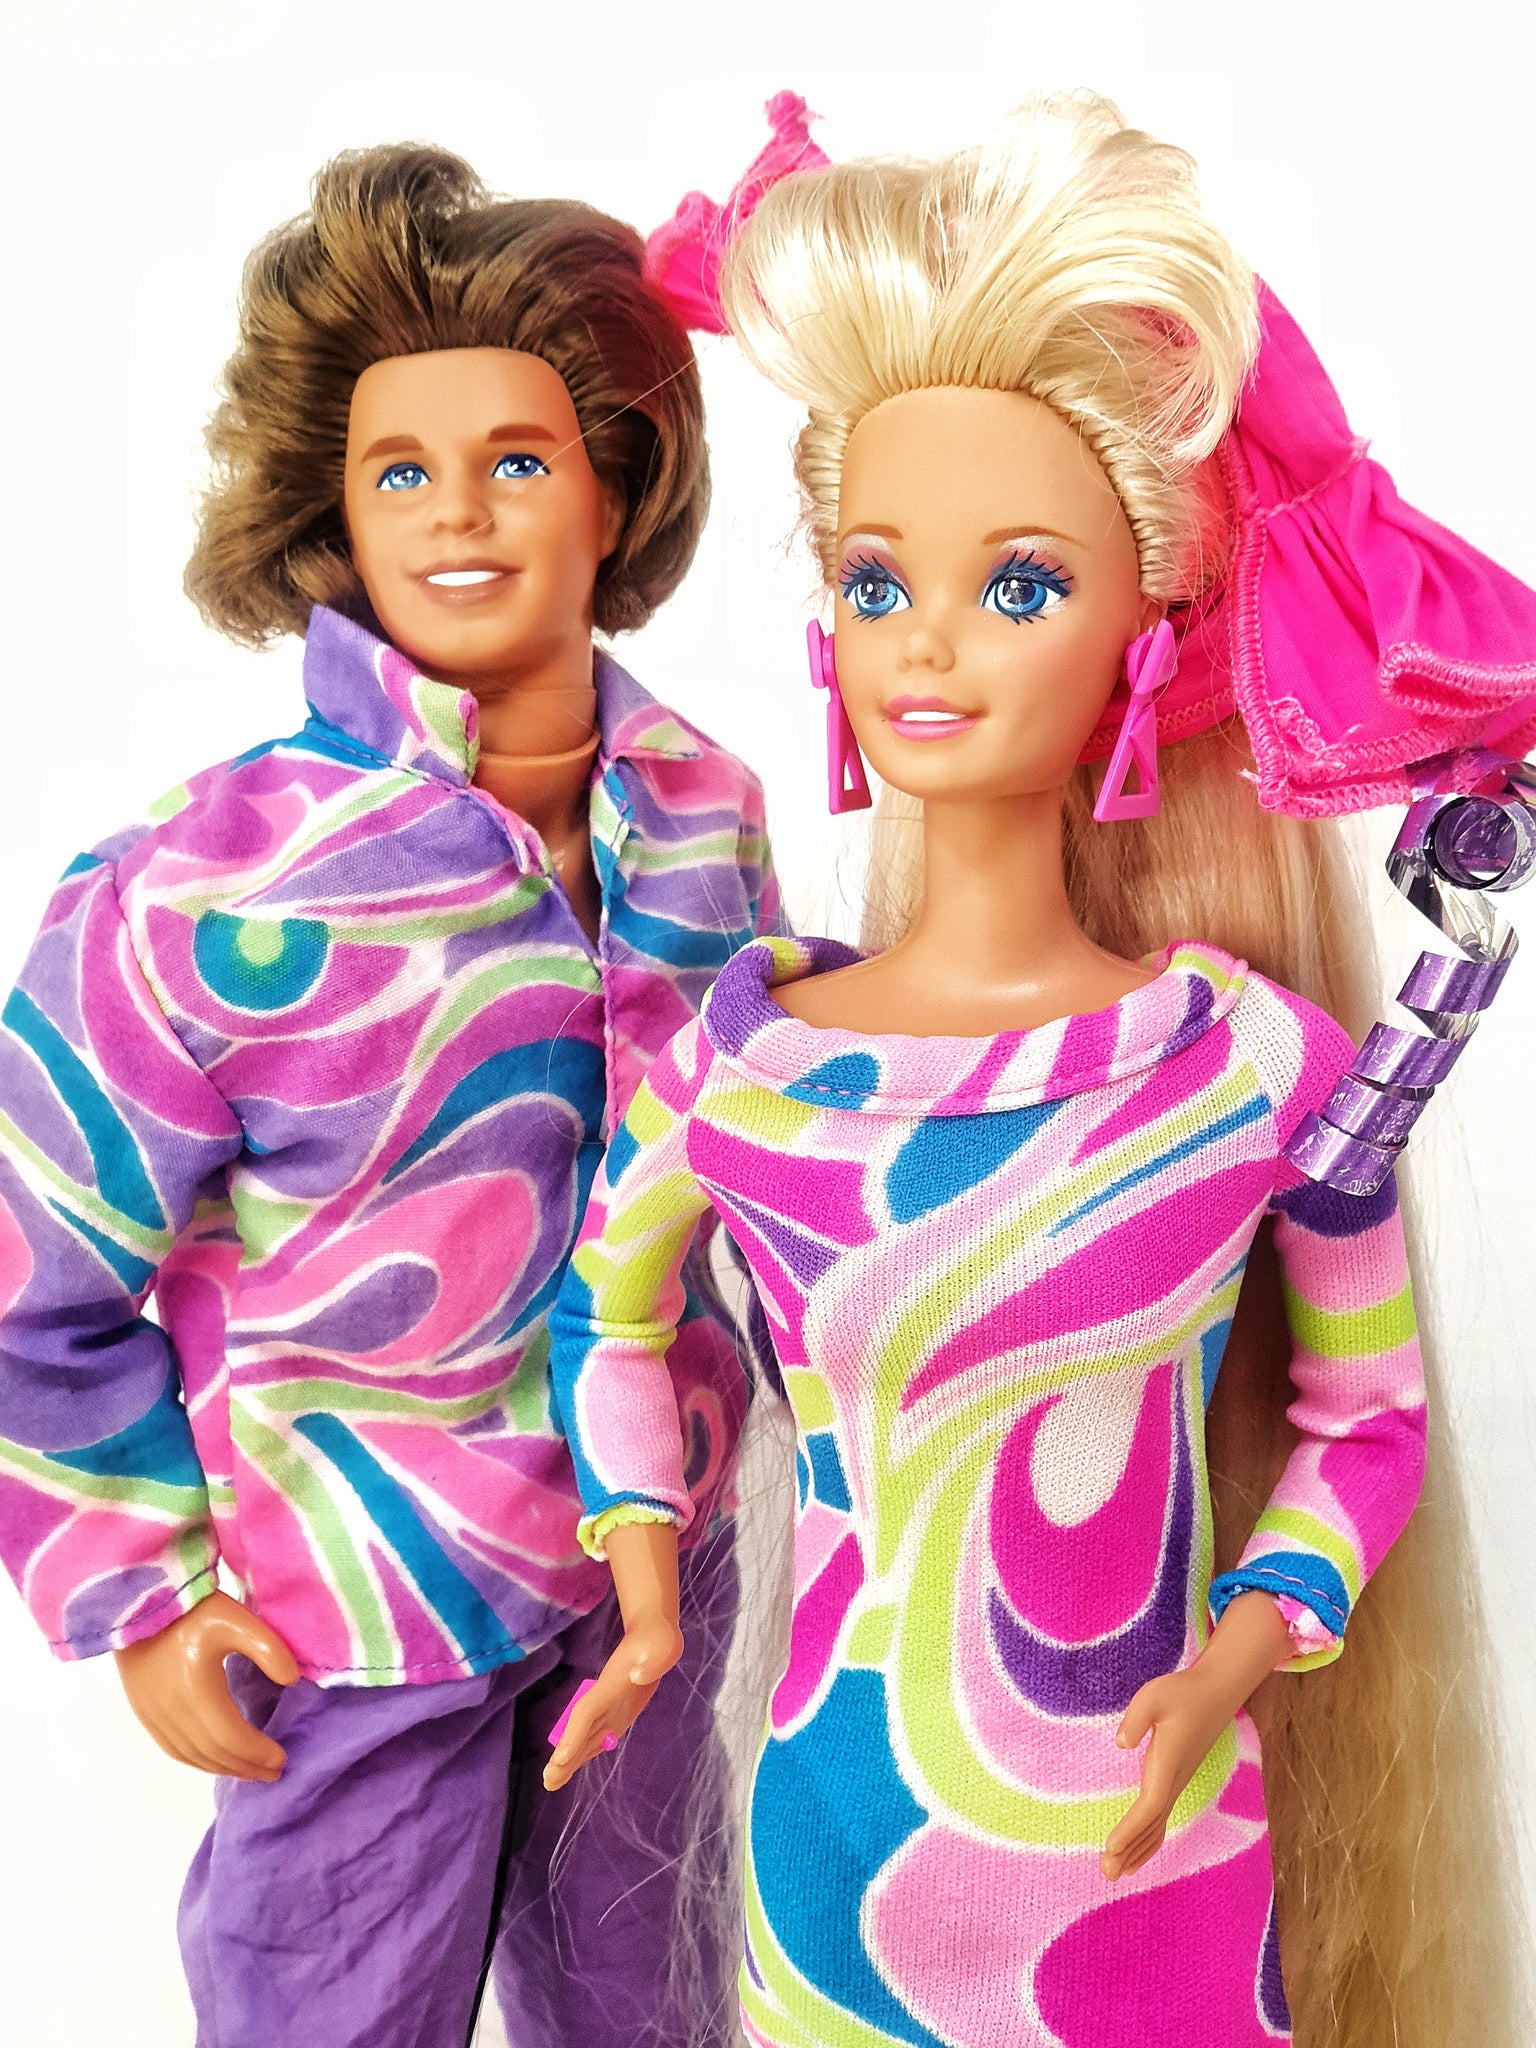 Barbie and Puccimania 